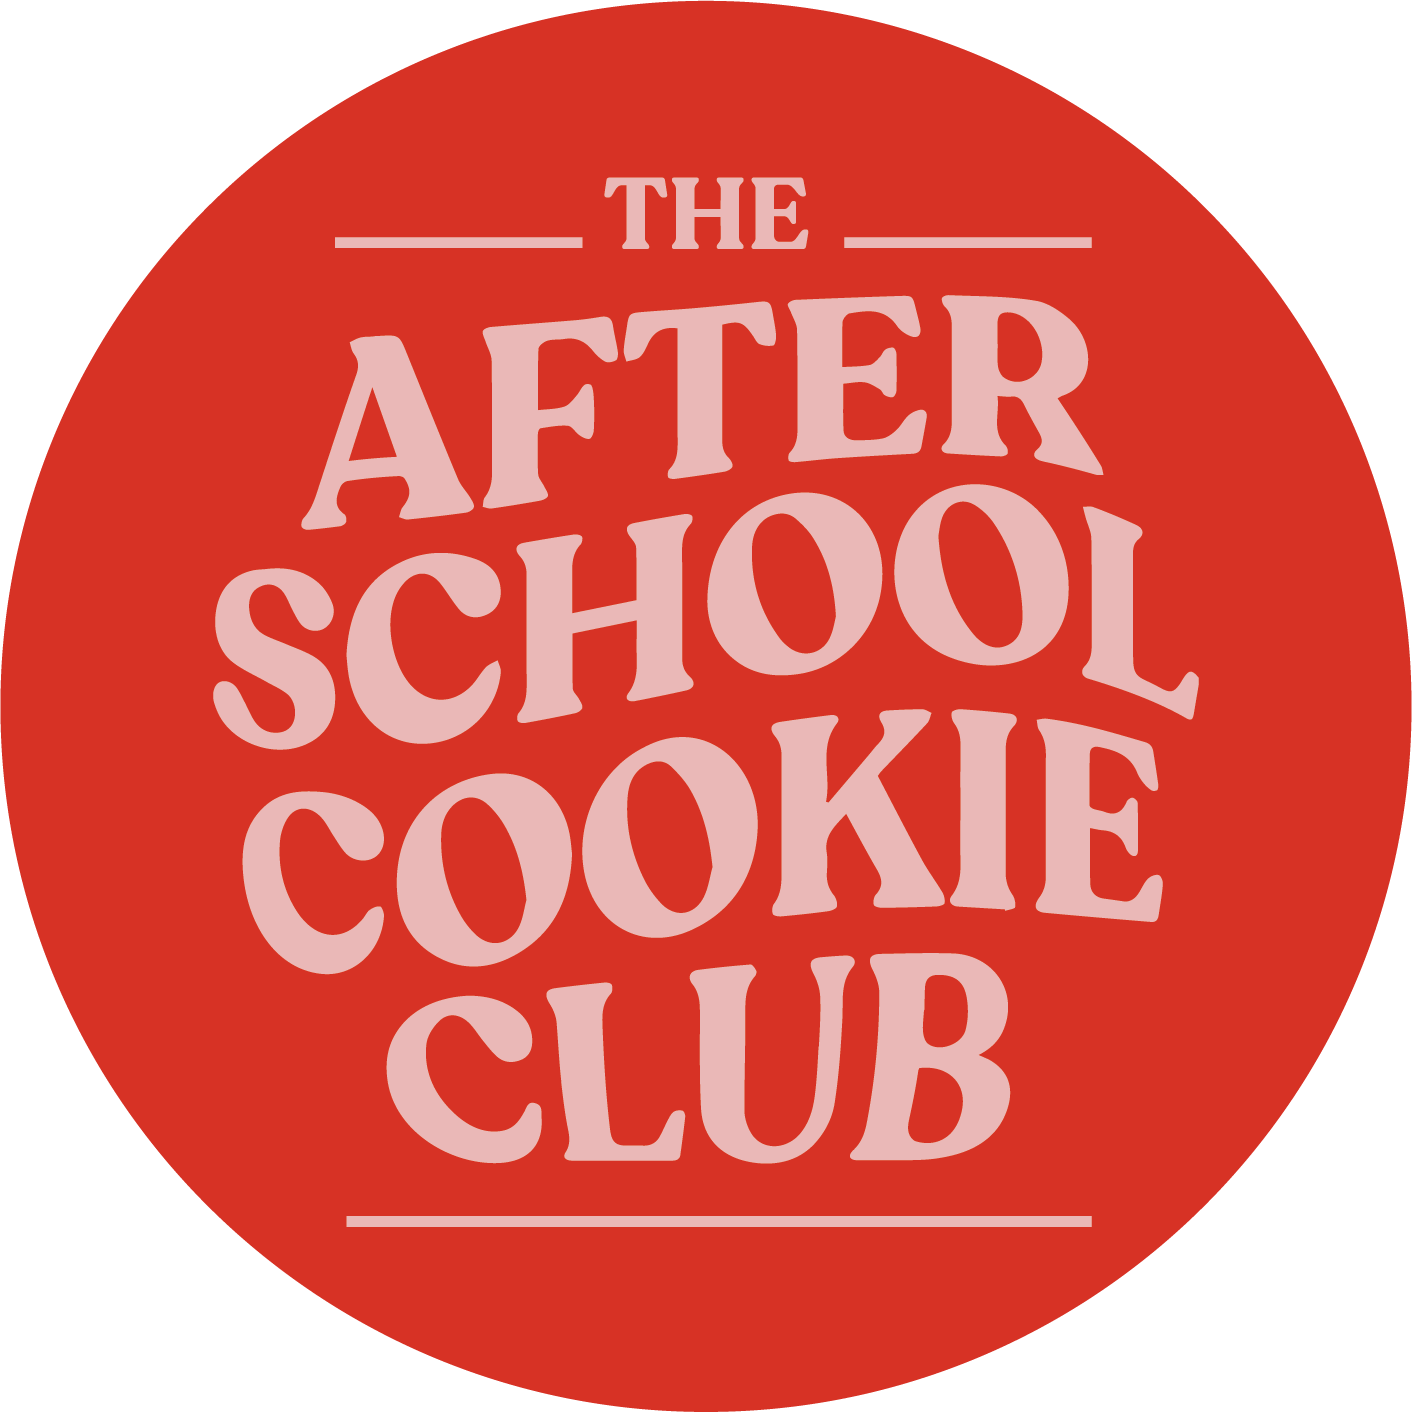 The After School Cookie Club